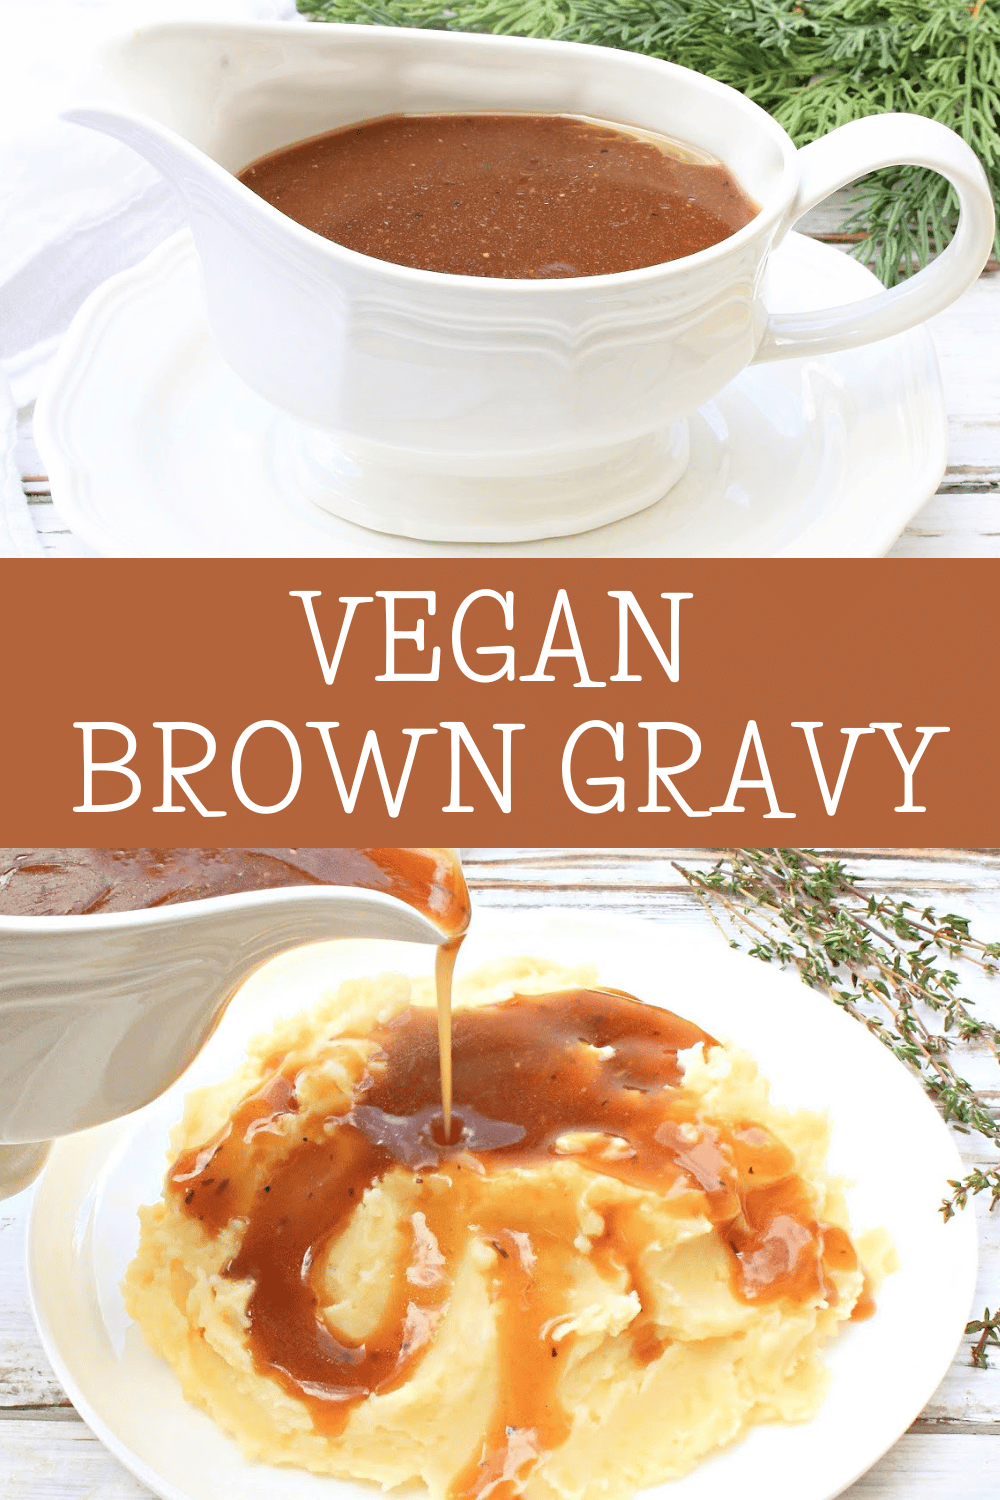 Brown Gravy ~ This homemade vegan brown gravy is hearty and rich with savory flavor. Ready to serve in 10 minutes!  via @thiswifecooks